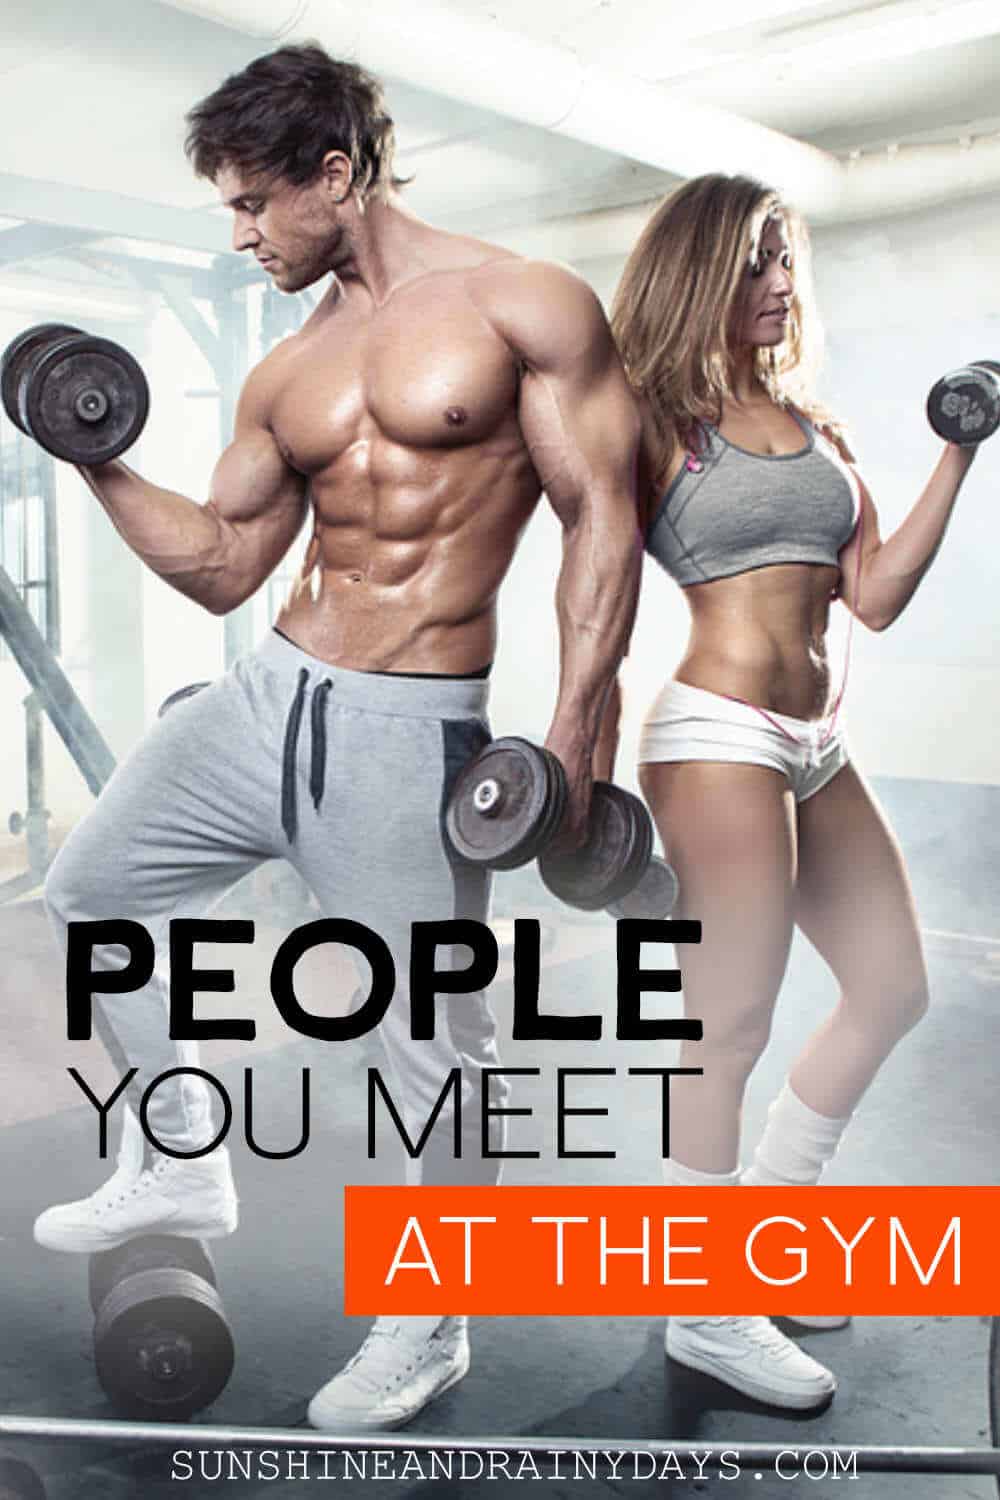 Guy and Girl working out at the gym with the words: People You Meet At The Gym